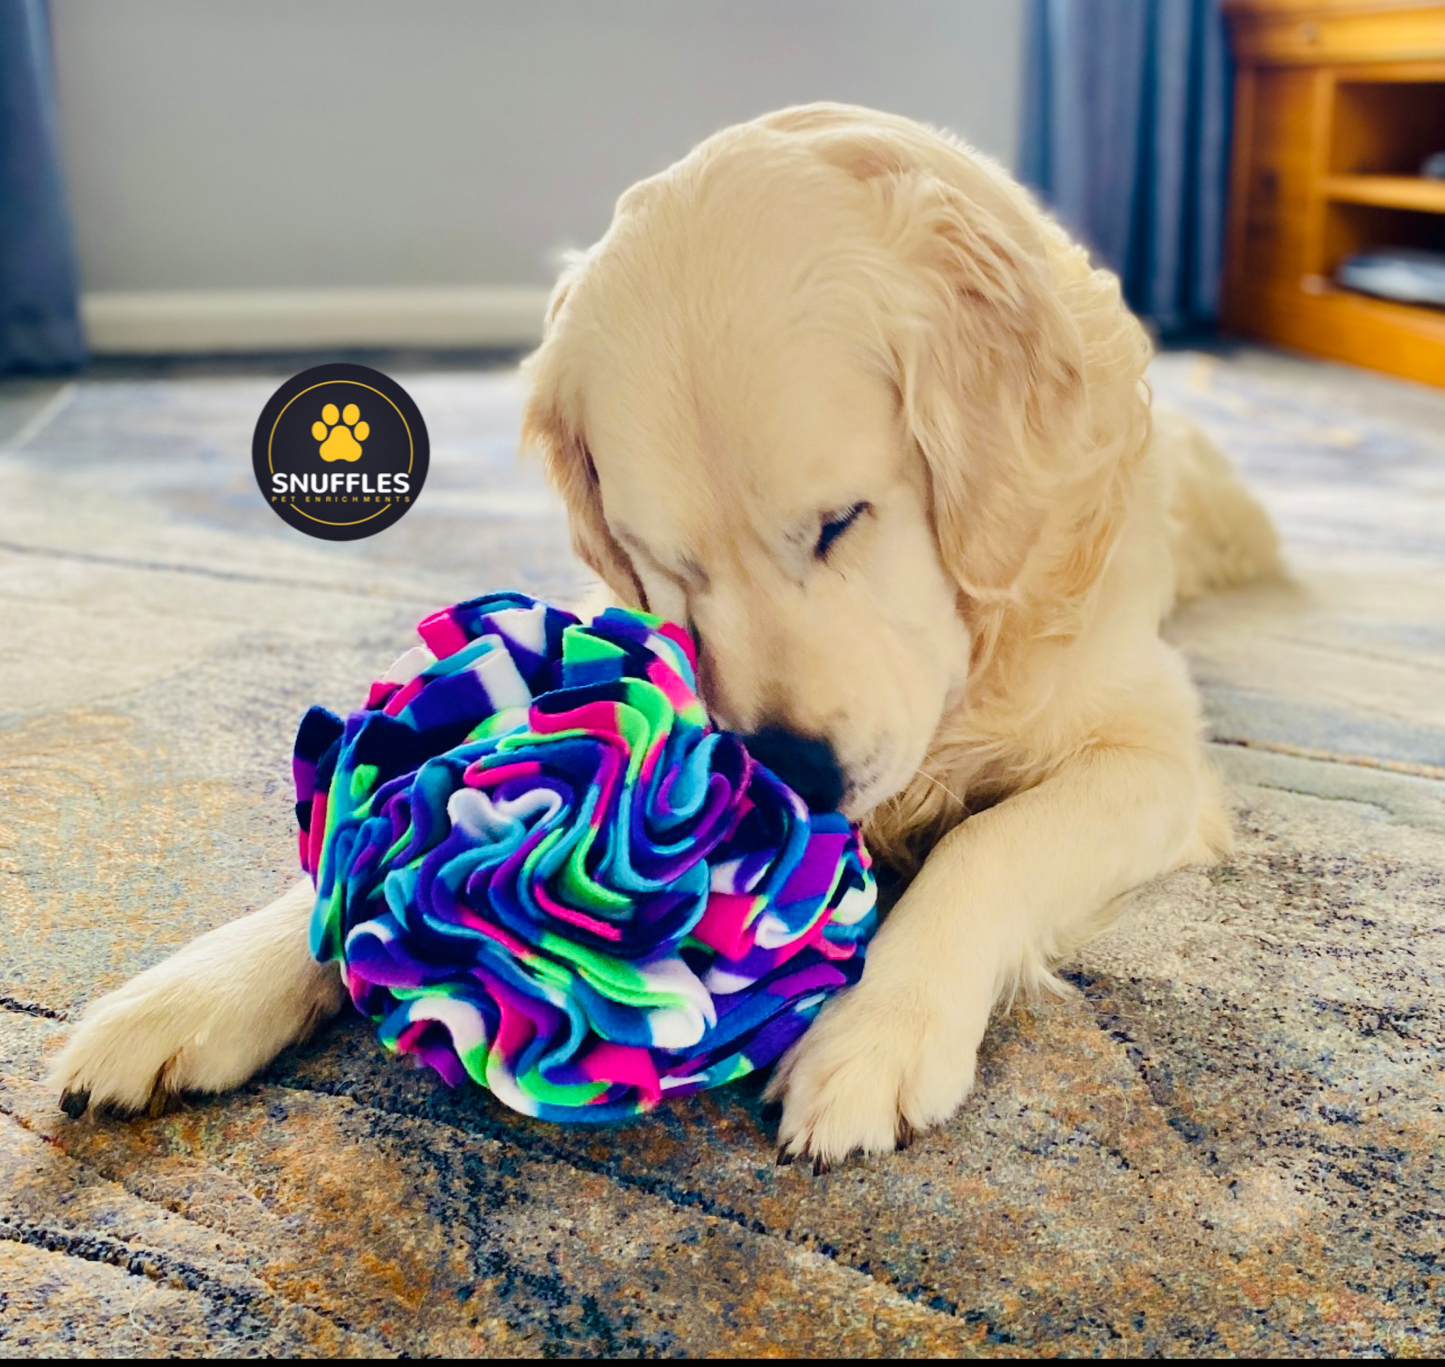 Large Snuffle Ball For Dogs, 10 Colour Options Available